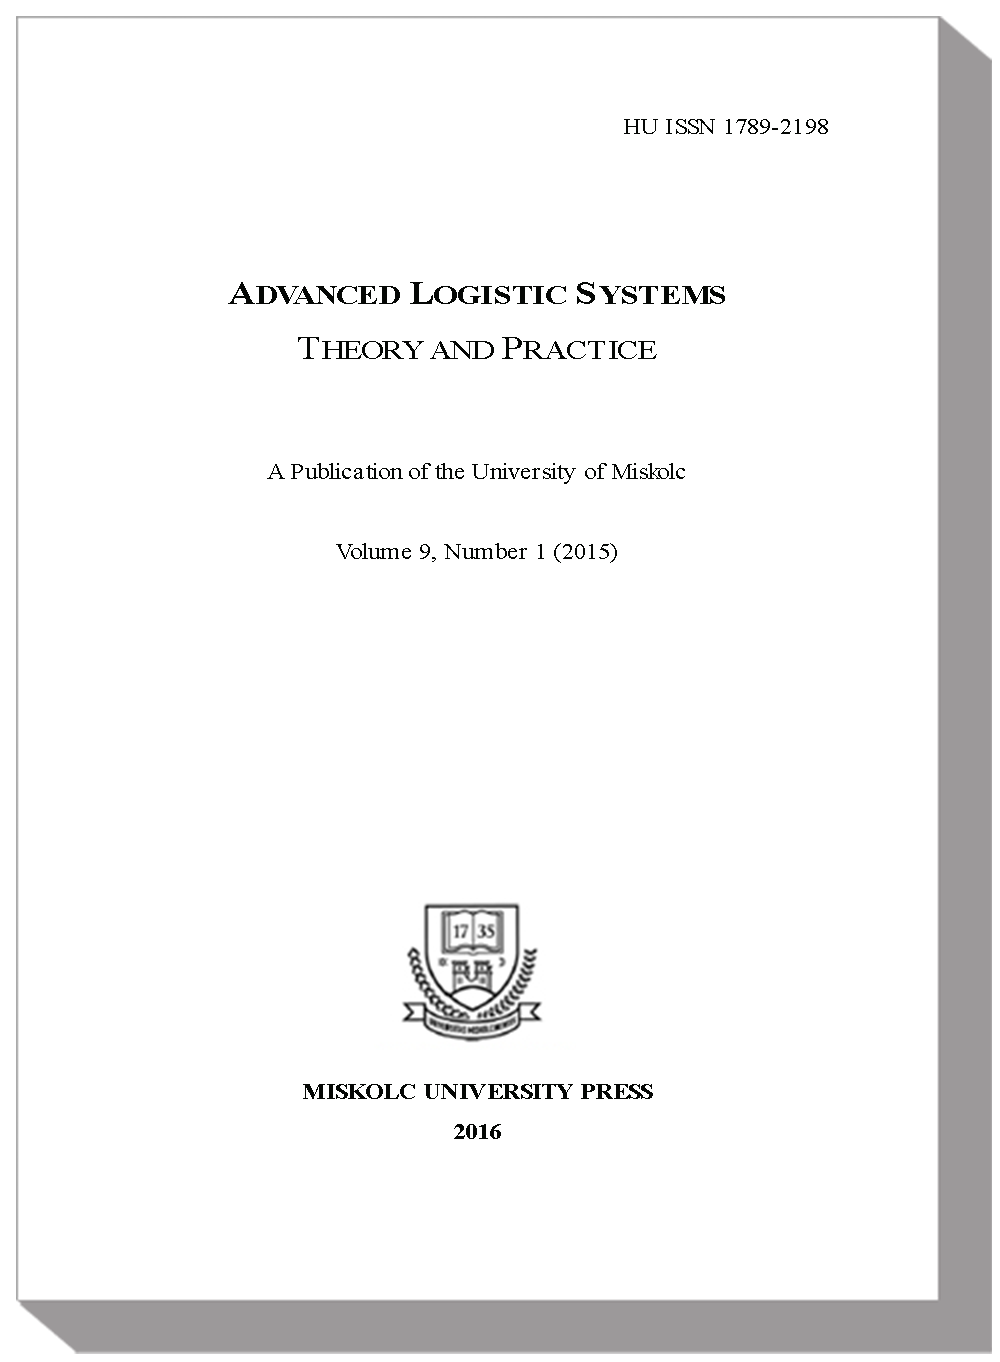 					View Vol. 9 No. 1 (2015): Advanced Logistic Systems - Theory and Practice
				